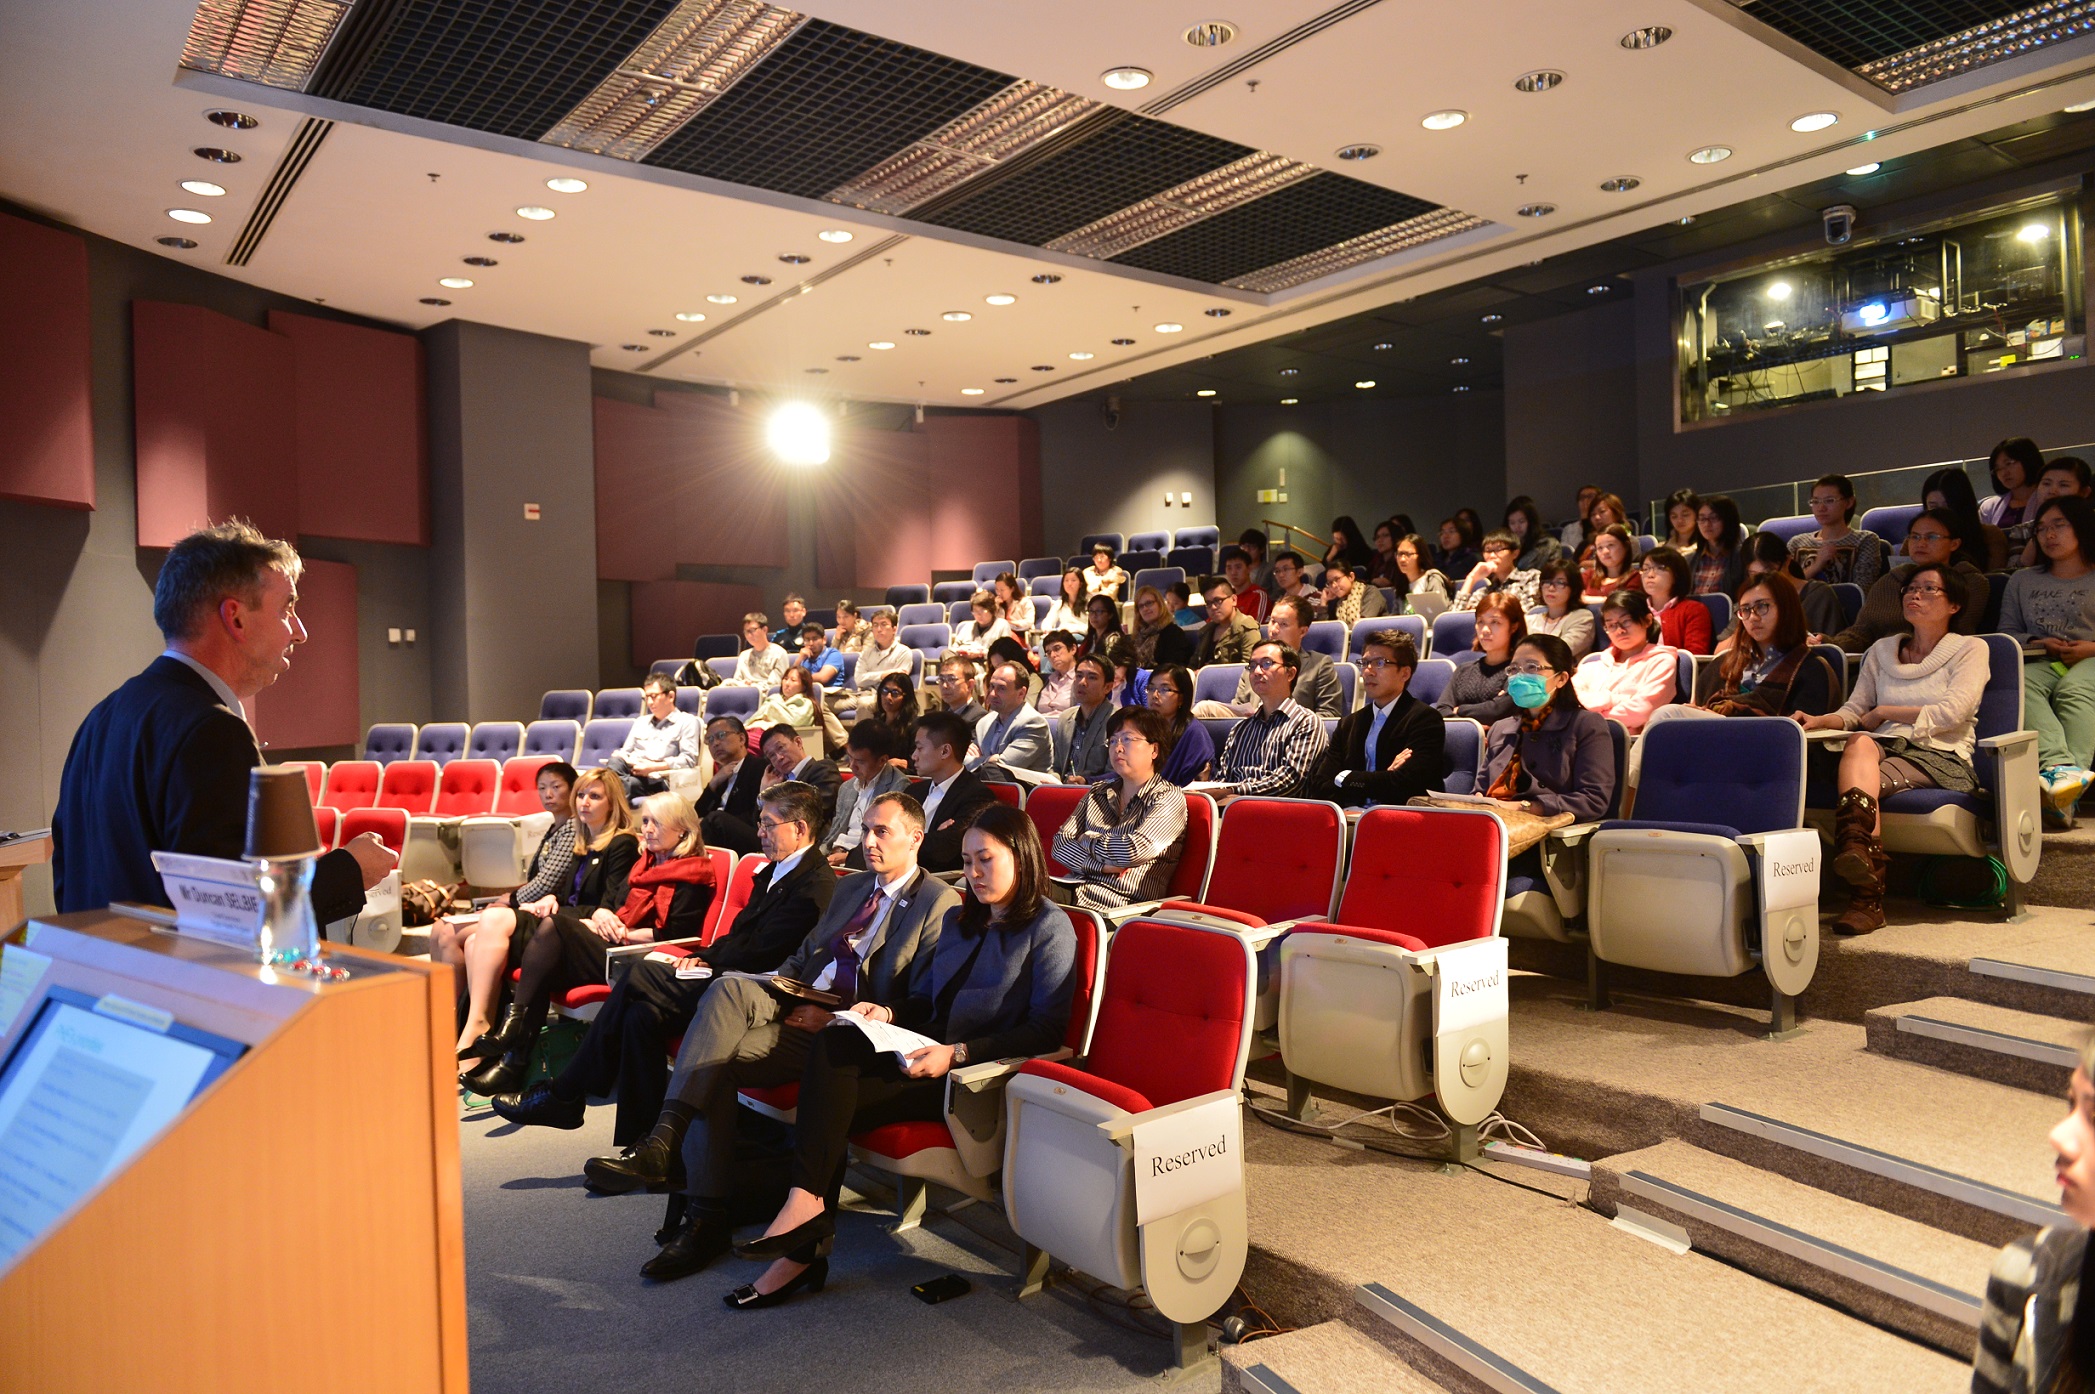 The seminar draws over 100 guests from the field of public health in attendance.